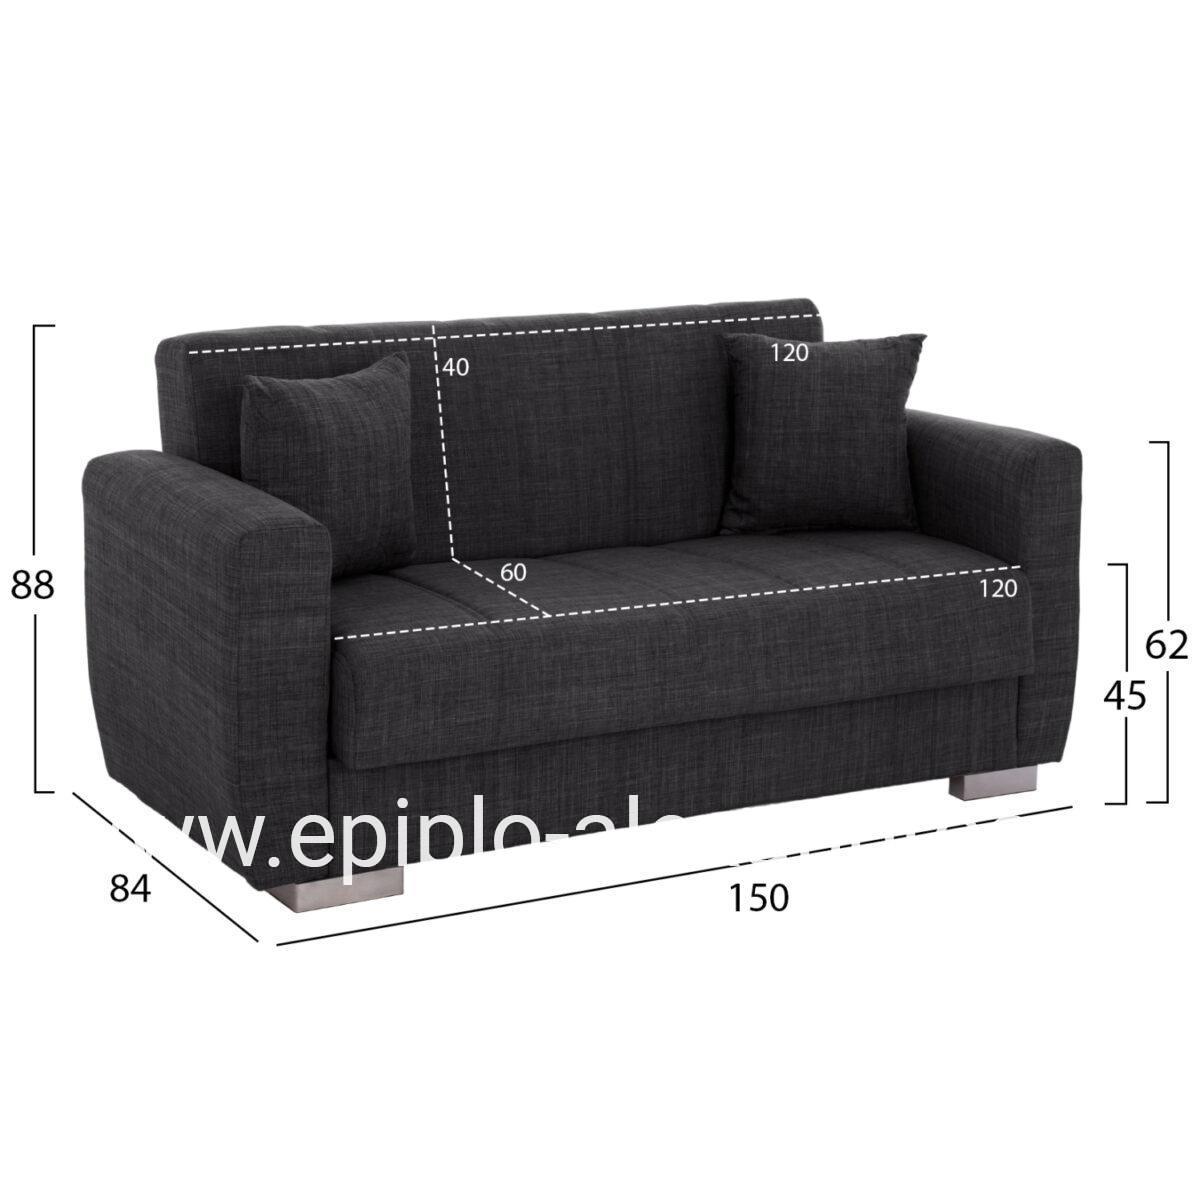 2-SEATER SOFA-BED